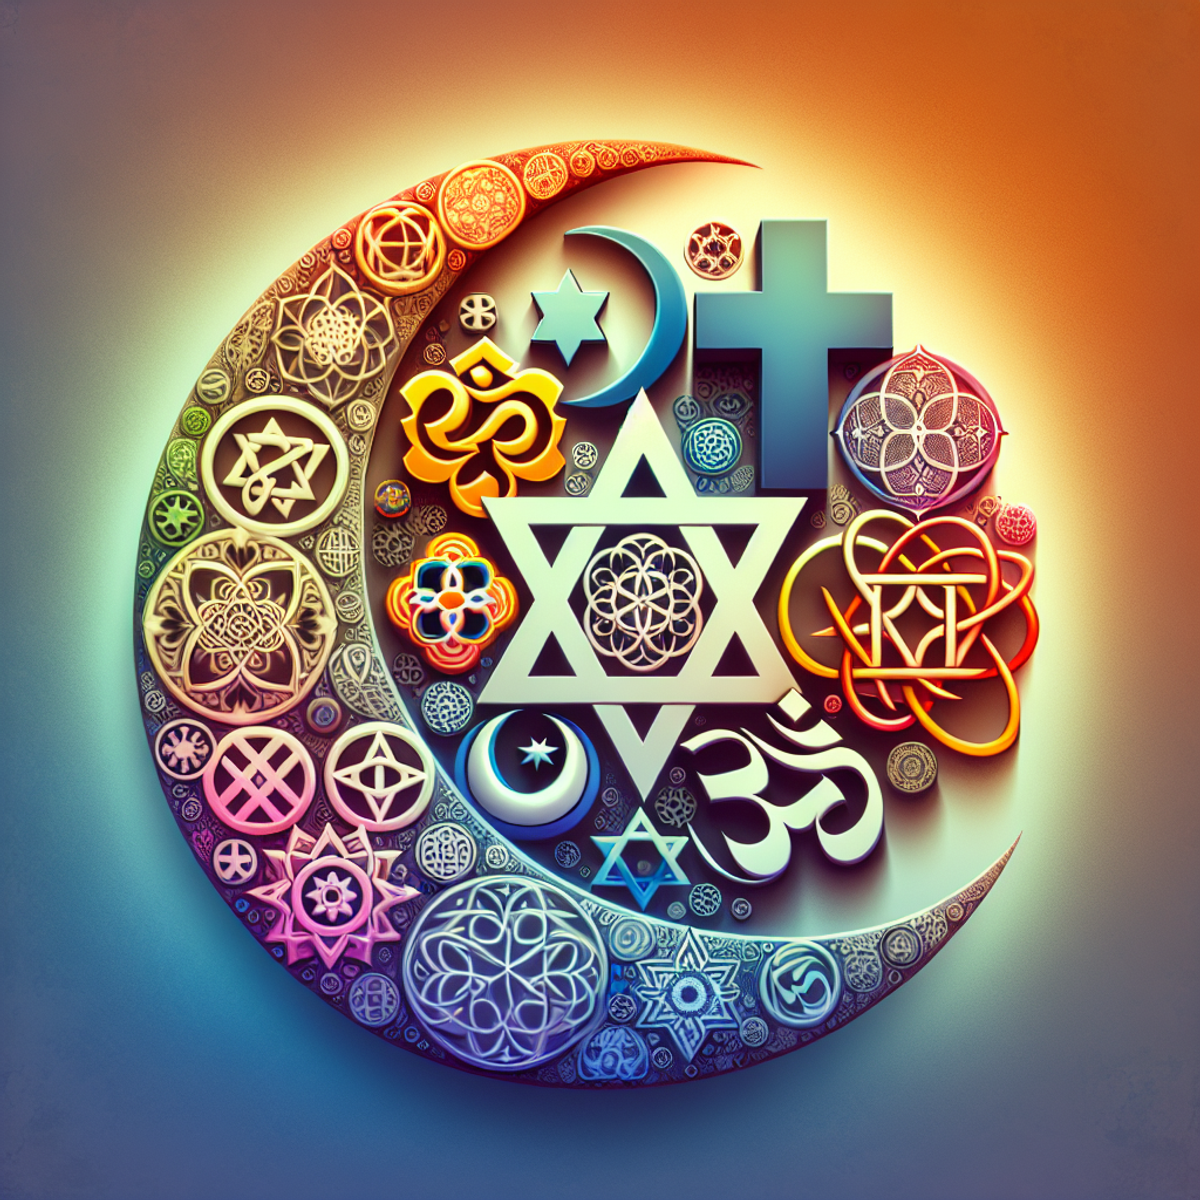 An image of religious symbols intertwined, including a cross, crescent moon and star, Om symbol, Star of David, Dharma wheel, and other tokens of faith, creating a vibrant and harmonious composition.